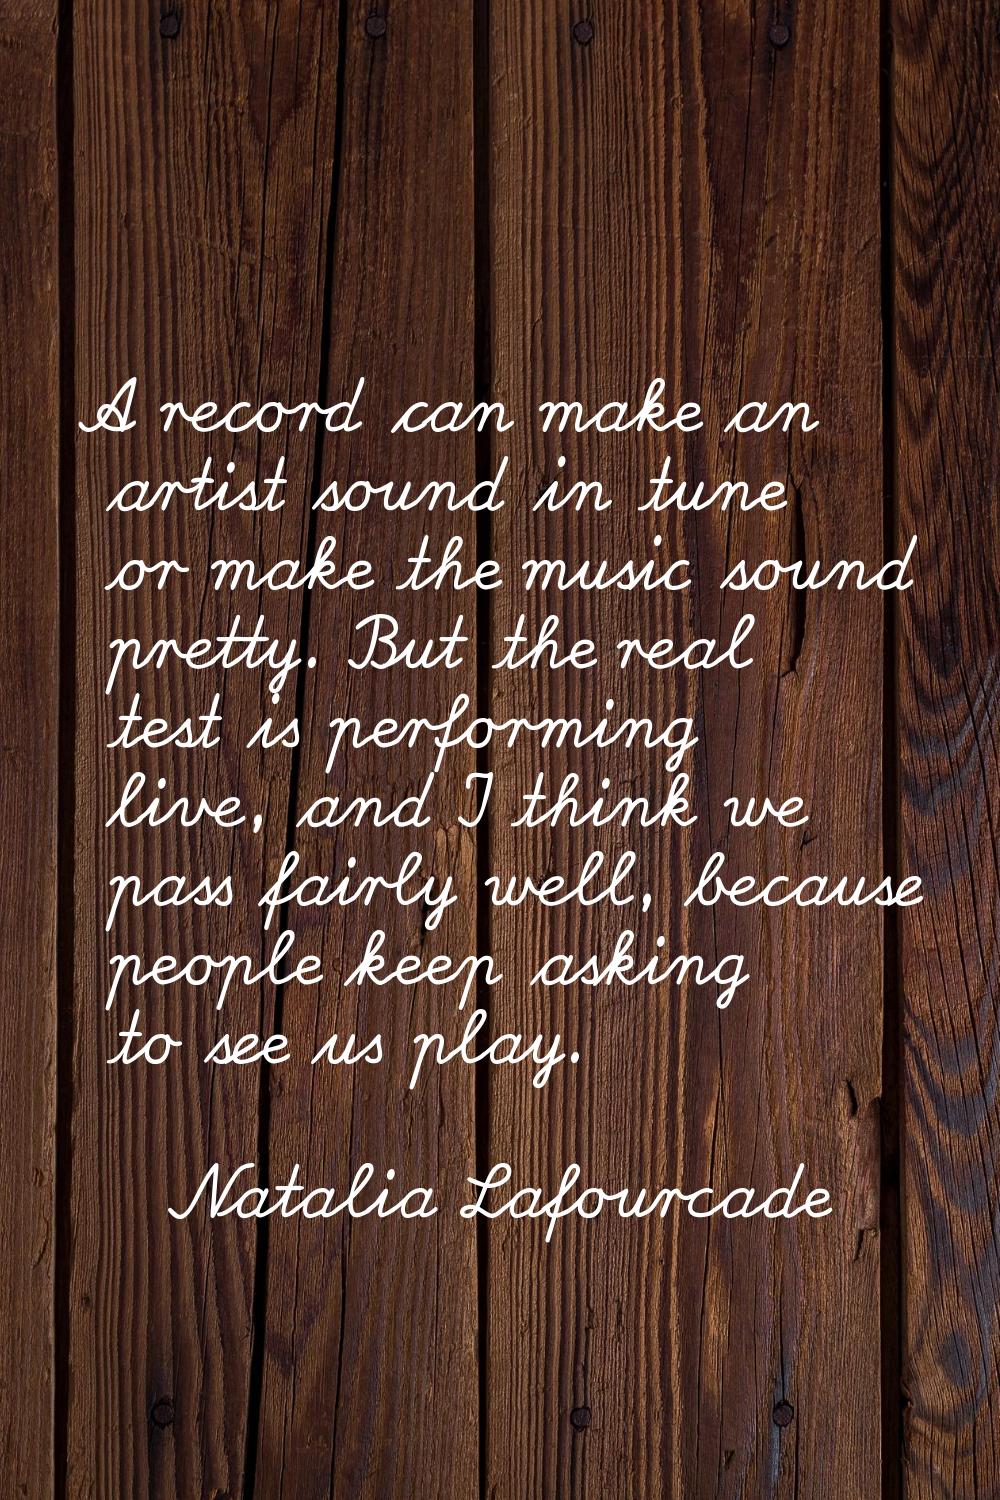 A record can make an artist sound in tune or make the music sound pretty. But the real test is perf